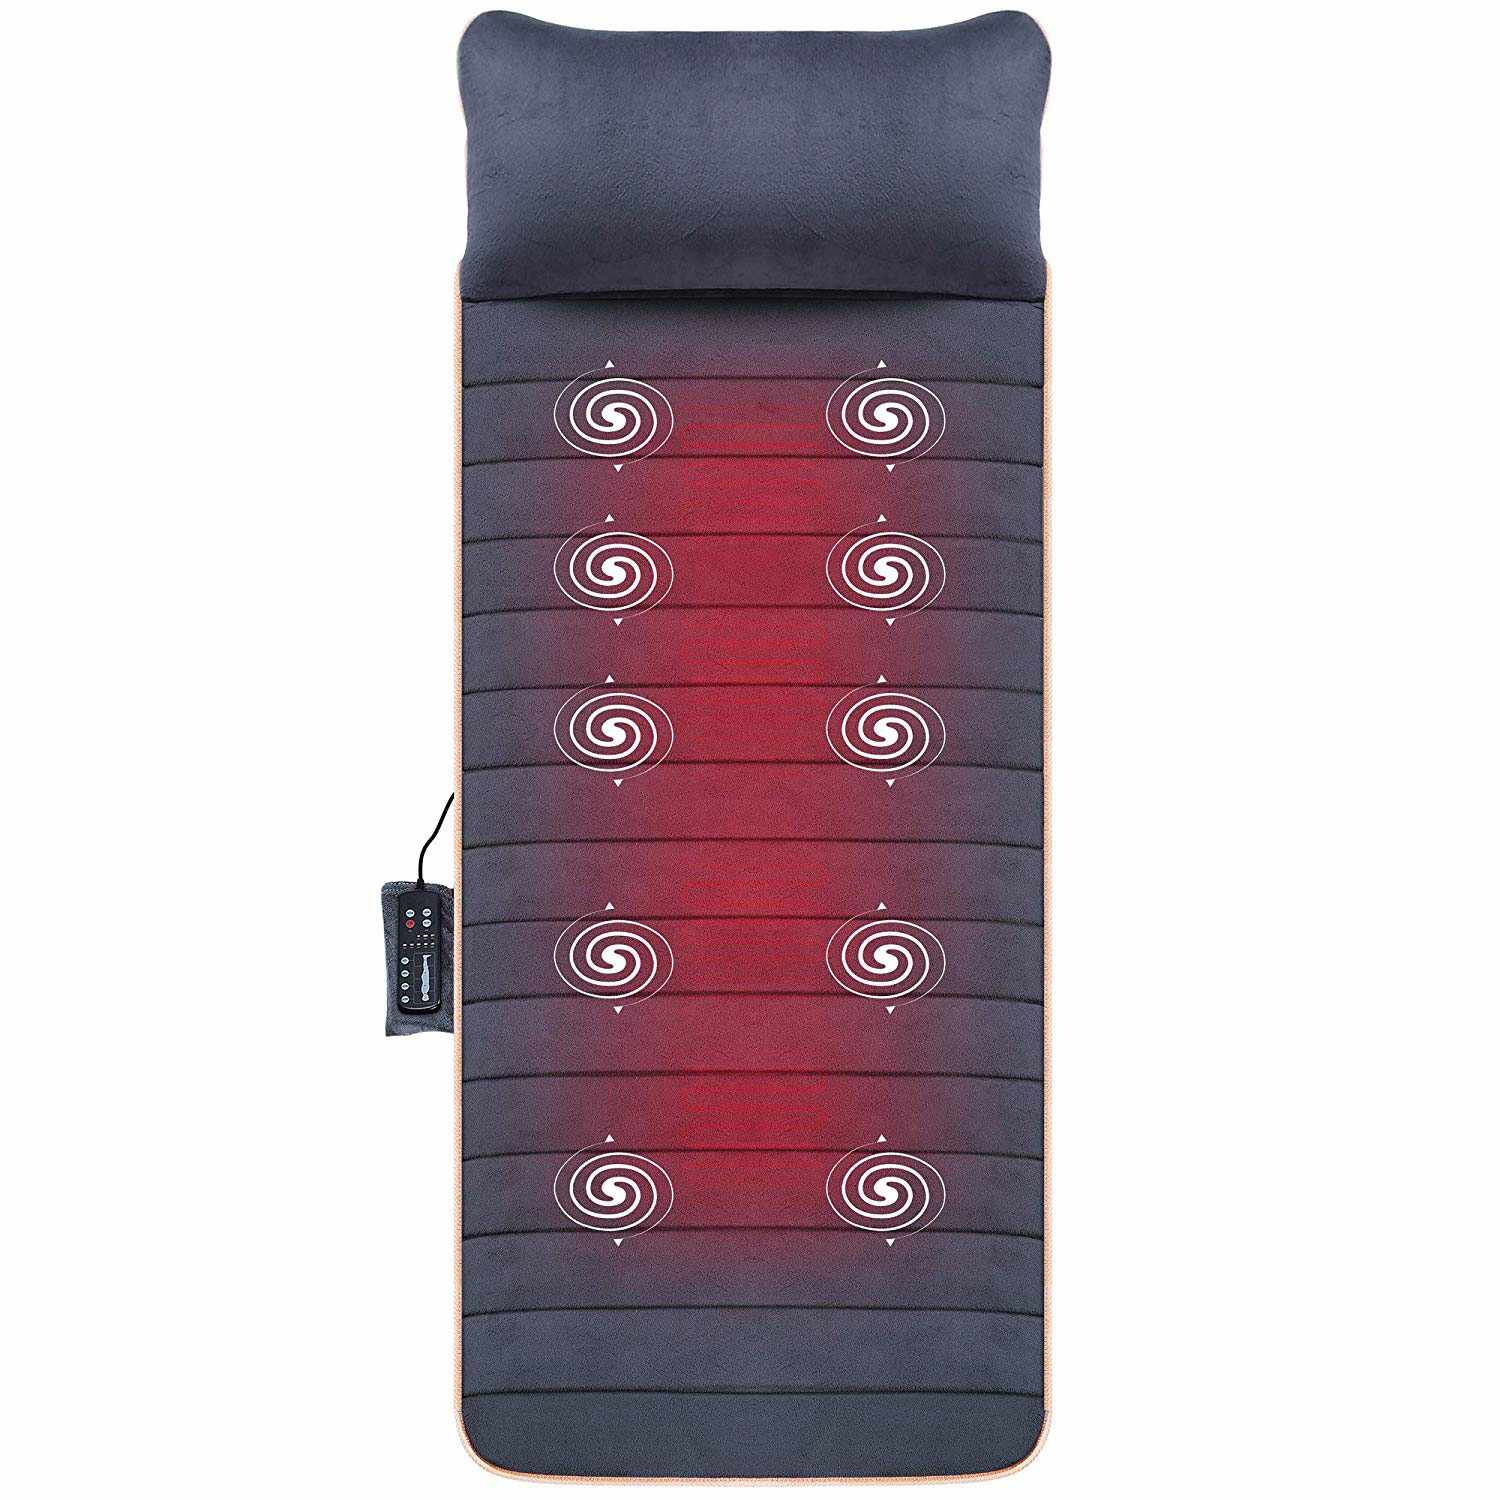 Massage Mat with 10 Vibrating Motors and 4 Therapy Heating pad